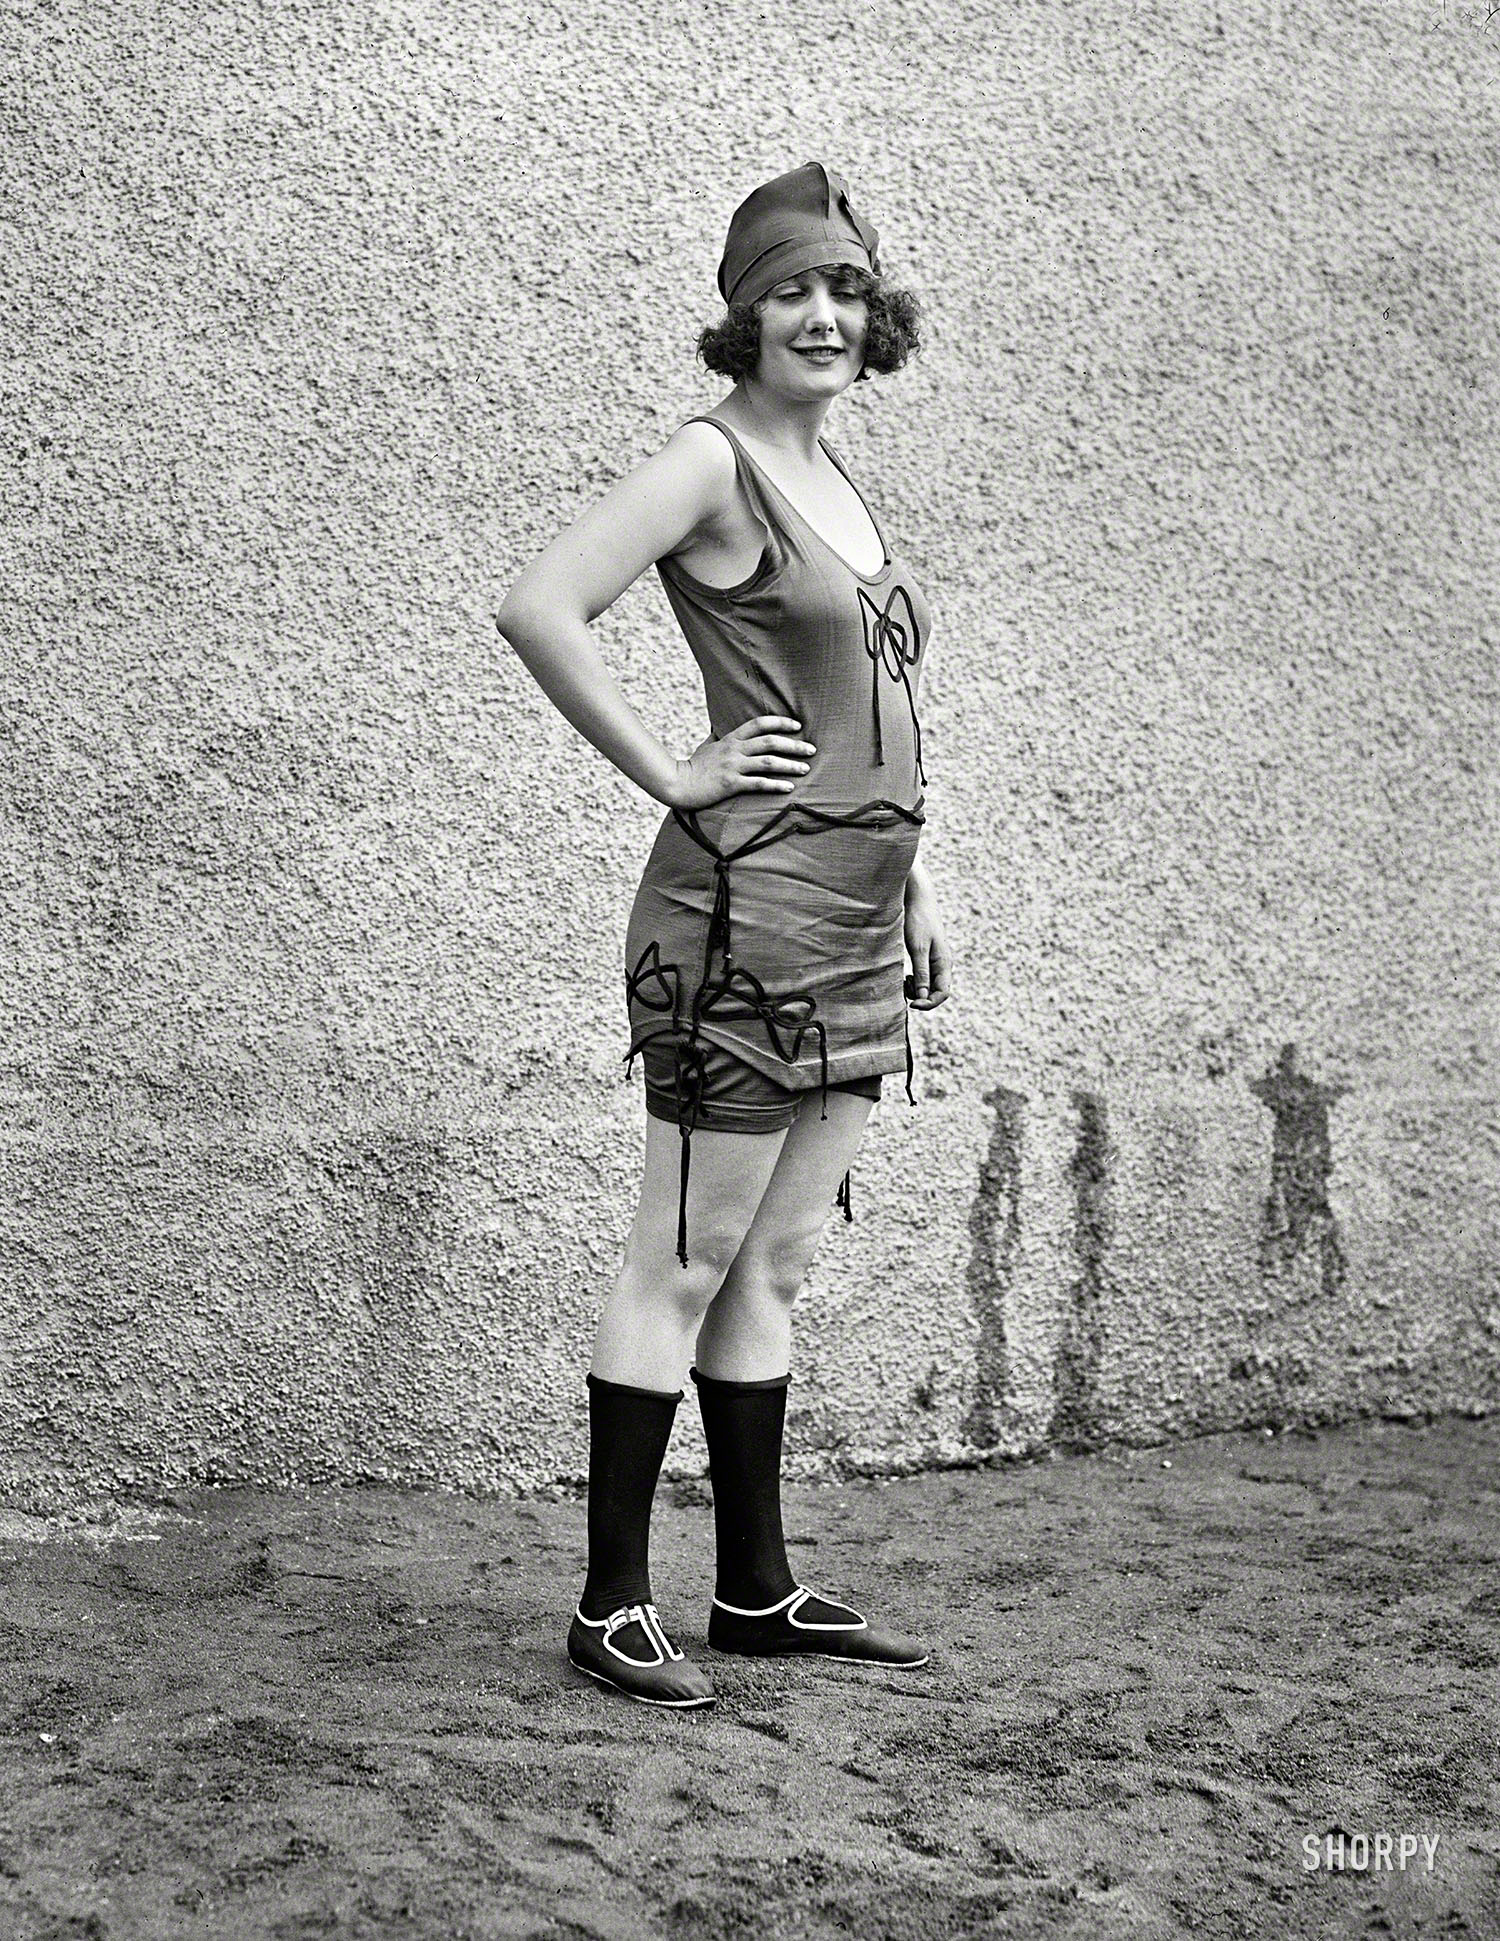 June 17, 1922. "Washington Advertising Club bathing costume contest at Tidal Basin." Our second look at the stylish entry of Miss Anna Niebel, the "former Follies girl" who took first place. Harris & Ewing glass negative. View full size.